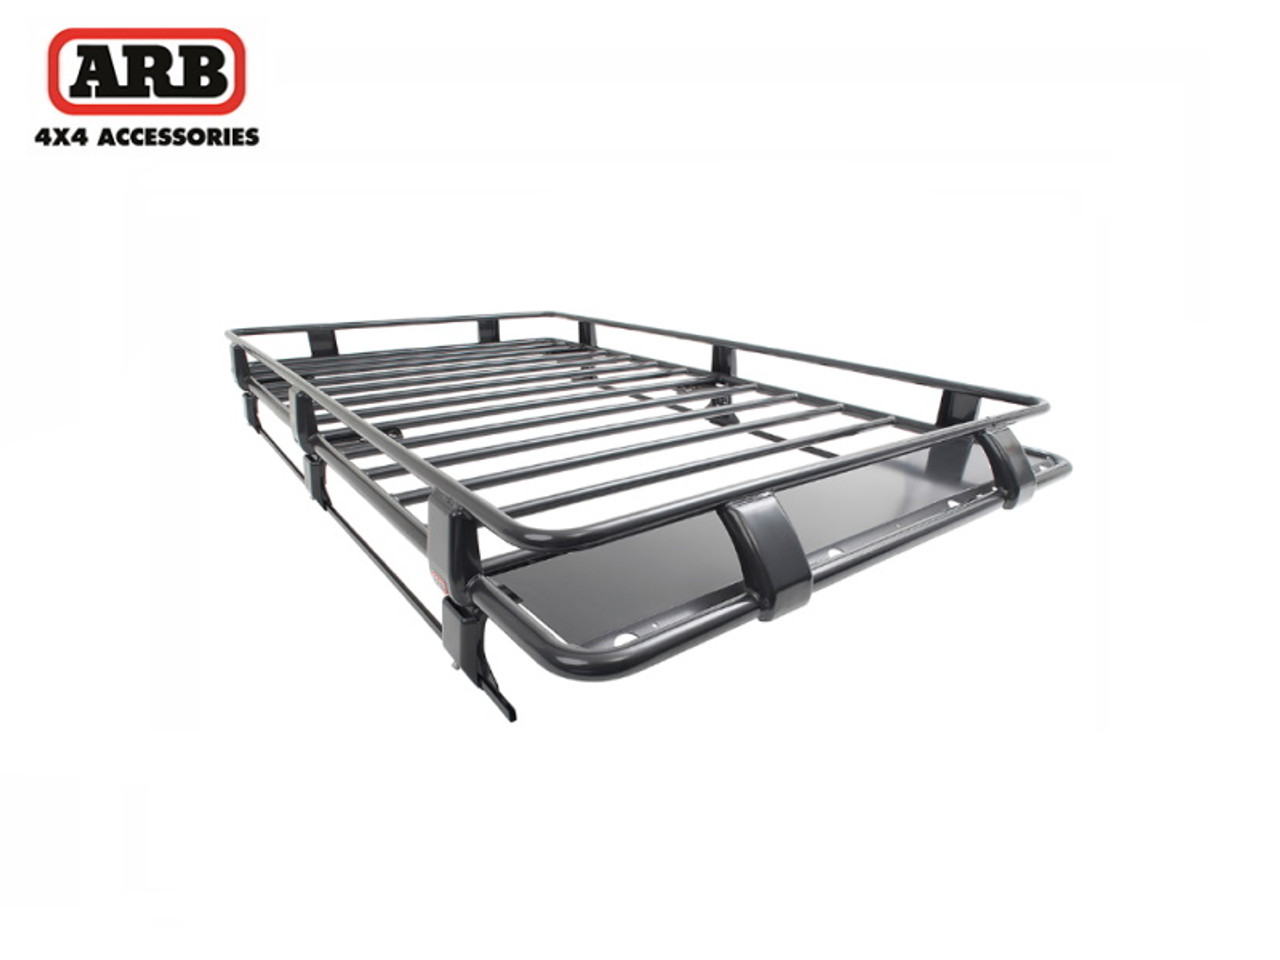 ARB Trade Deluxe Steel Roof Rack For Defender - 3800110